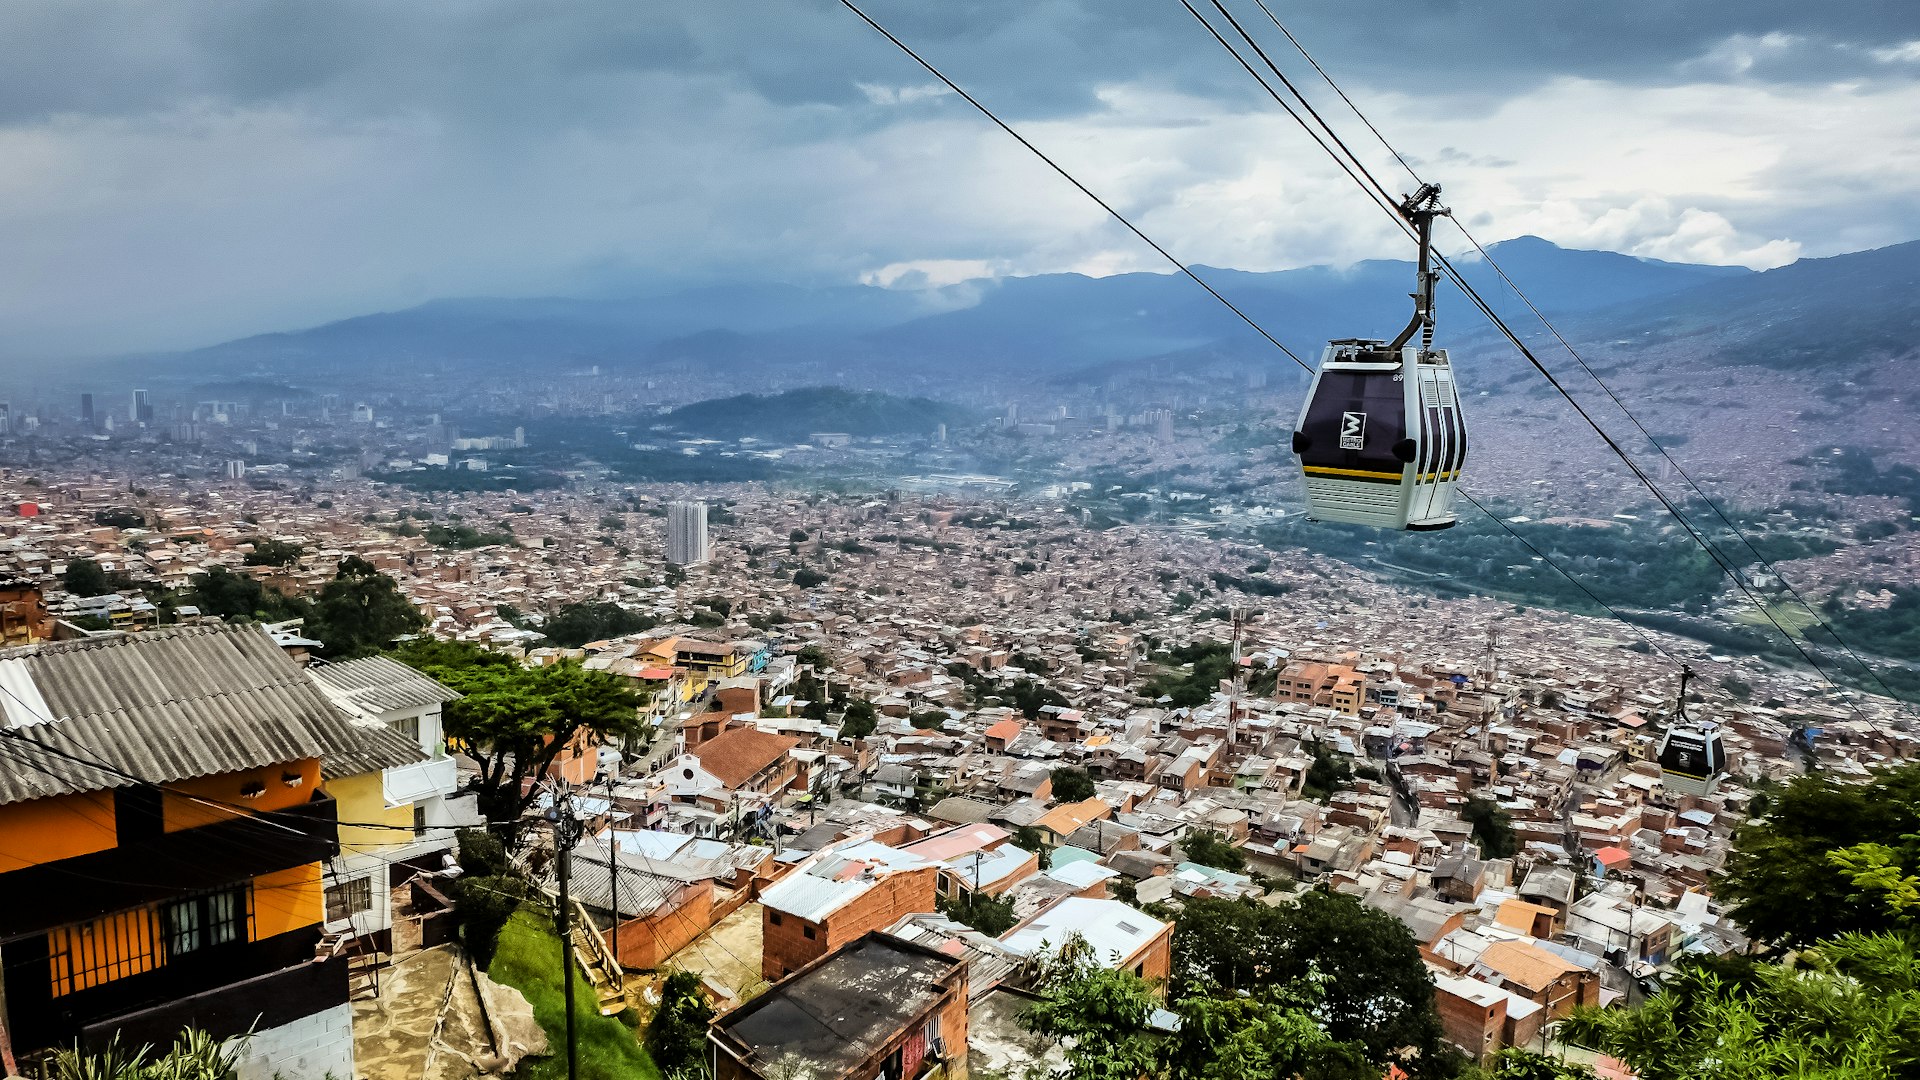 500px Photo ID: 110891847 - Metro lines at Medellin Colombia, not all of them overground, this one over air!